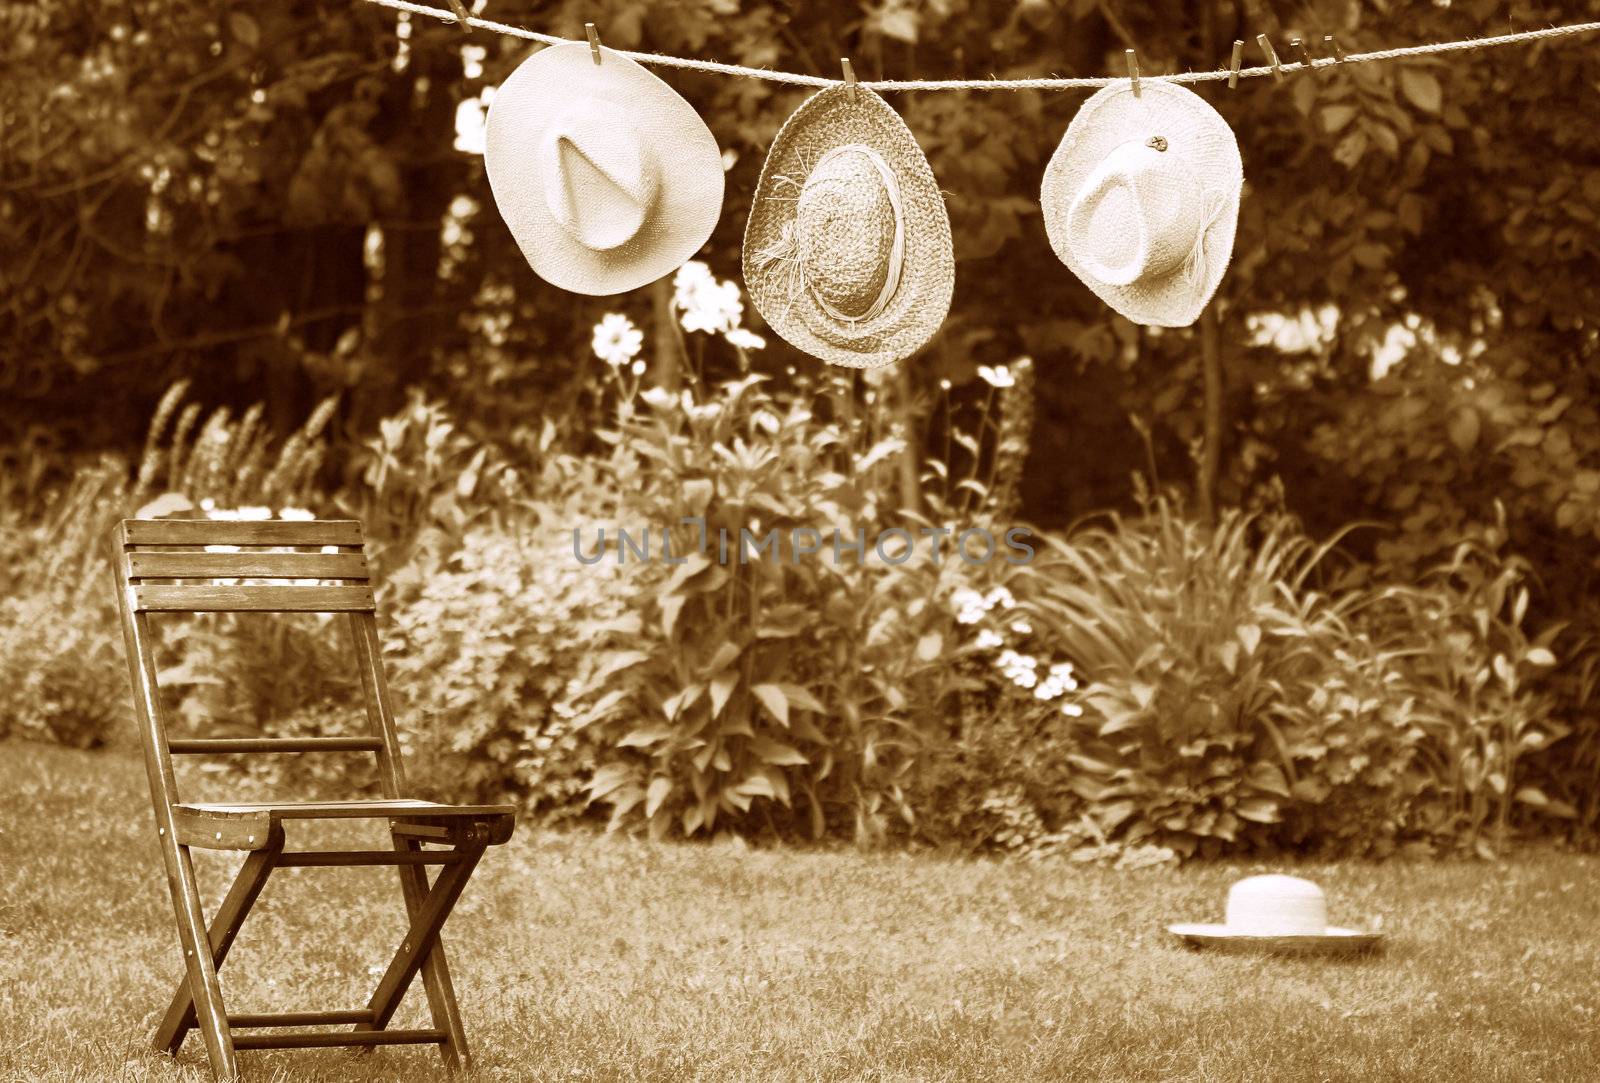 Straw hats on an old clothesline in a summer garden/ Sepia tone